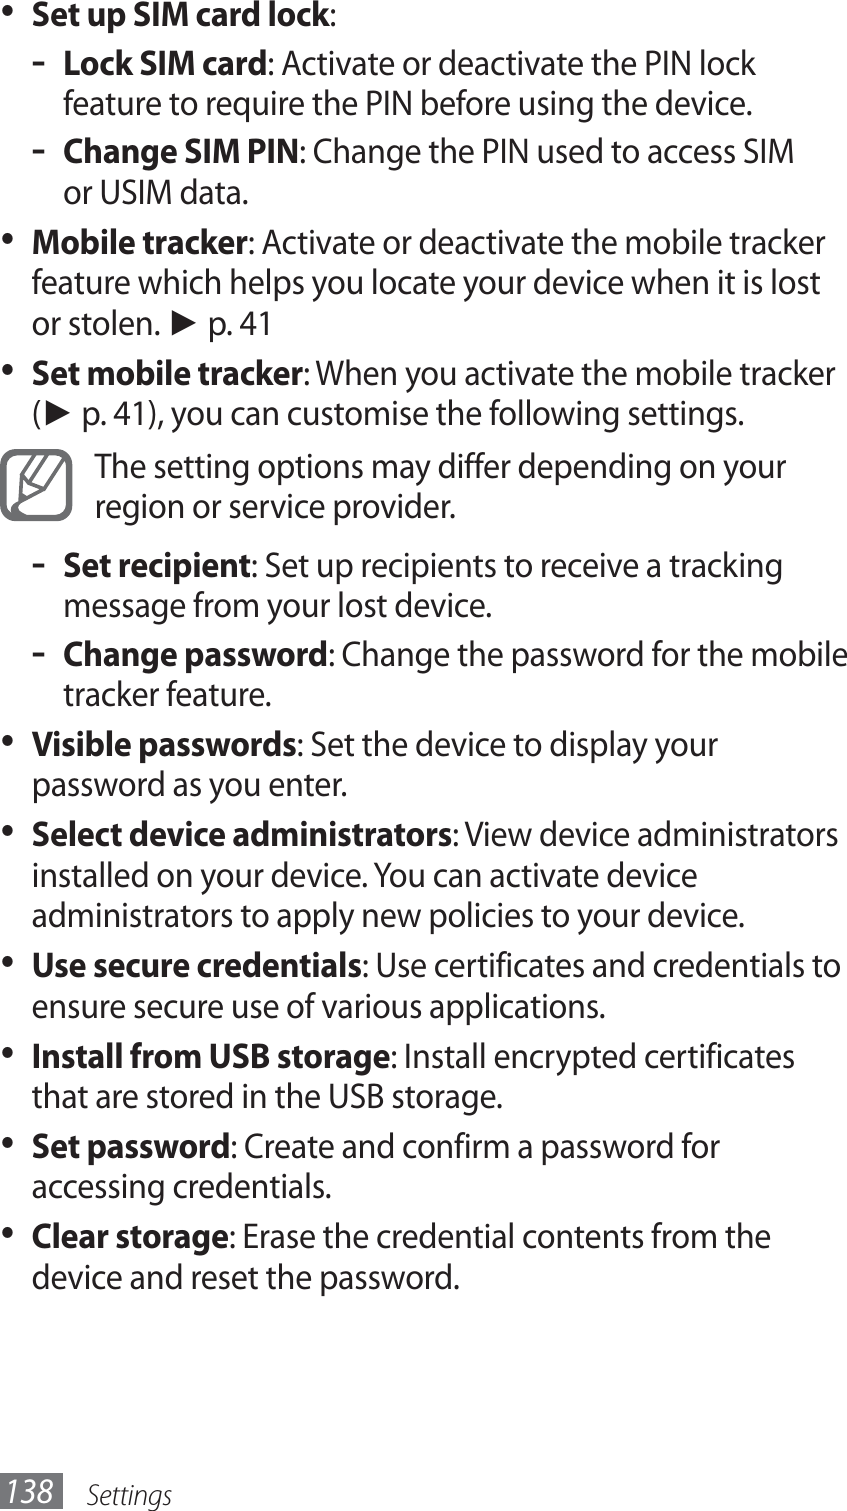 Settings138Set up SIM card lock•  :Lock SIM card - : Activate or deactivate the PIN lock feature to require the PIN before using the device.Change SIM PIN - : Change the PIN used to access SIM or USIM data.Mobile tracker•  : Activate or deactivate the mobile tracker feature which helps you locate your device when it is lost or stolen. ► p. 41Set mobile tracker•  : When you activate the mobile tracker (► p. 41), you can customise the following settings.The setting options may differ depending on your region or service provider.Set recipient - : Set up recipients to receive a tracking message from your lost device.Change password - : Change the password for the mobile tracker feature.Visible passwords•  : Set the device to display your password as you enter.Select device administrators•  : View device administrators installed on your device. You can activate device administrators to apply new policies to your device.Use secure credentials•  : Use certificates and credentials to ensure secure use of various applications.Install from USB storage•  : Install encrypted certificates that are stored in the USB storage.Set password•  : Create and confirm a password for accessing credentials.Clear storage•  : Erase the credential contents from the device and reset the password.